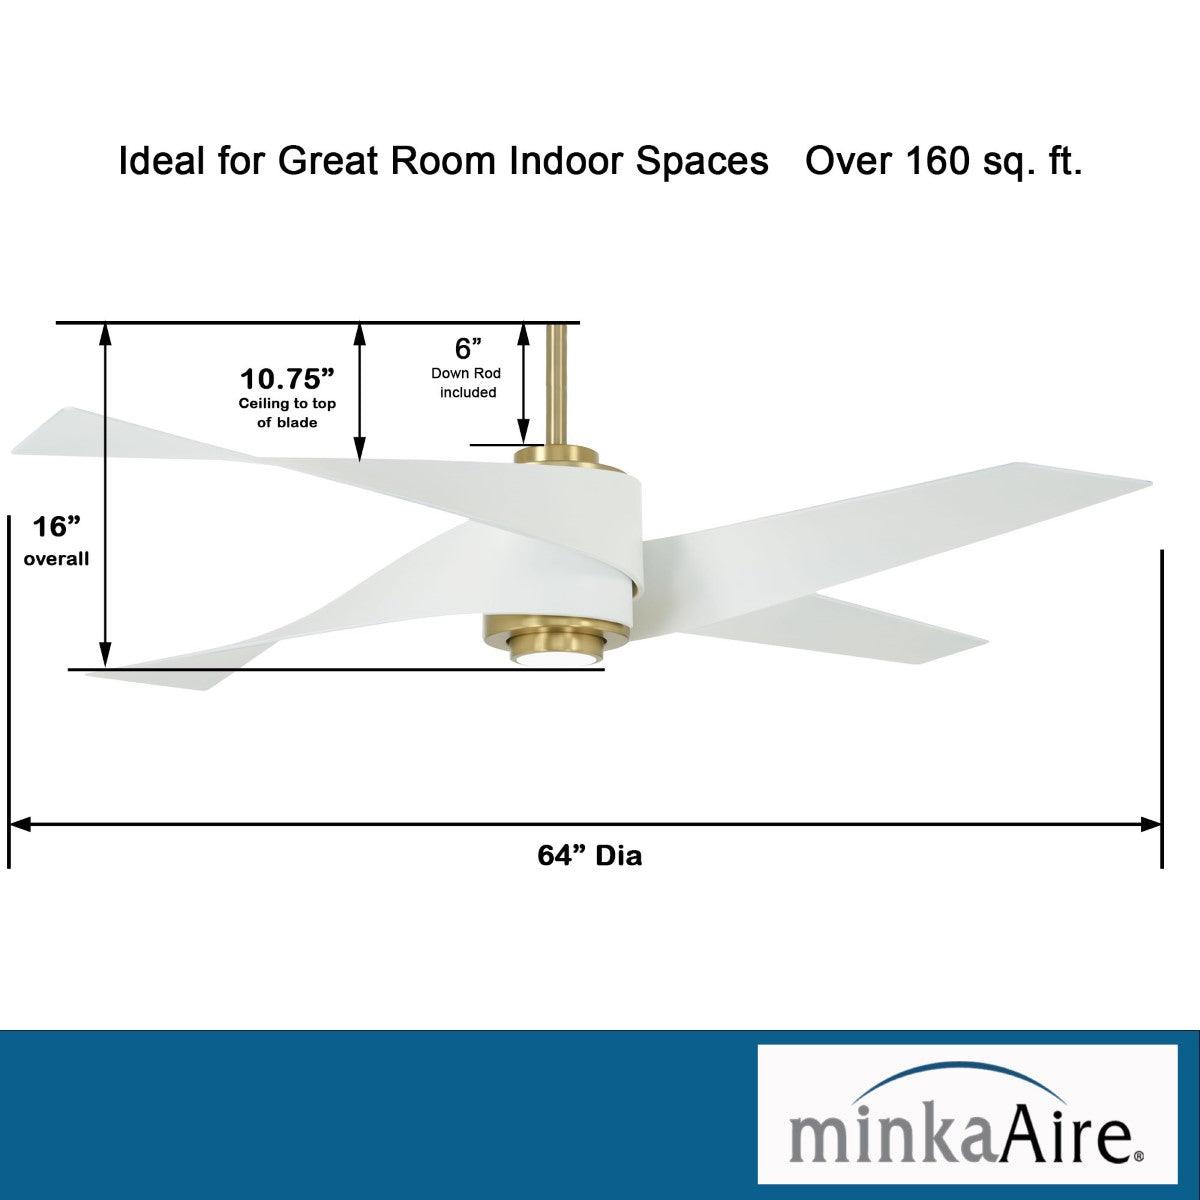 Artemis IV 64 Inch Contemporary Propeller Ceiling Fan With Light And Remote